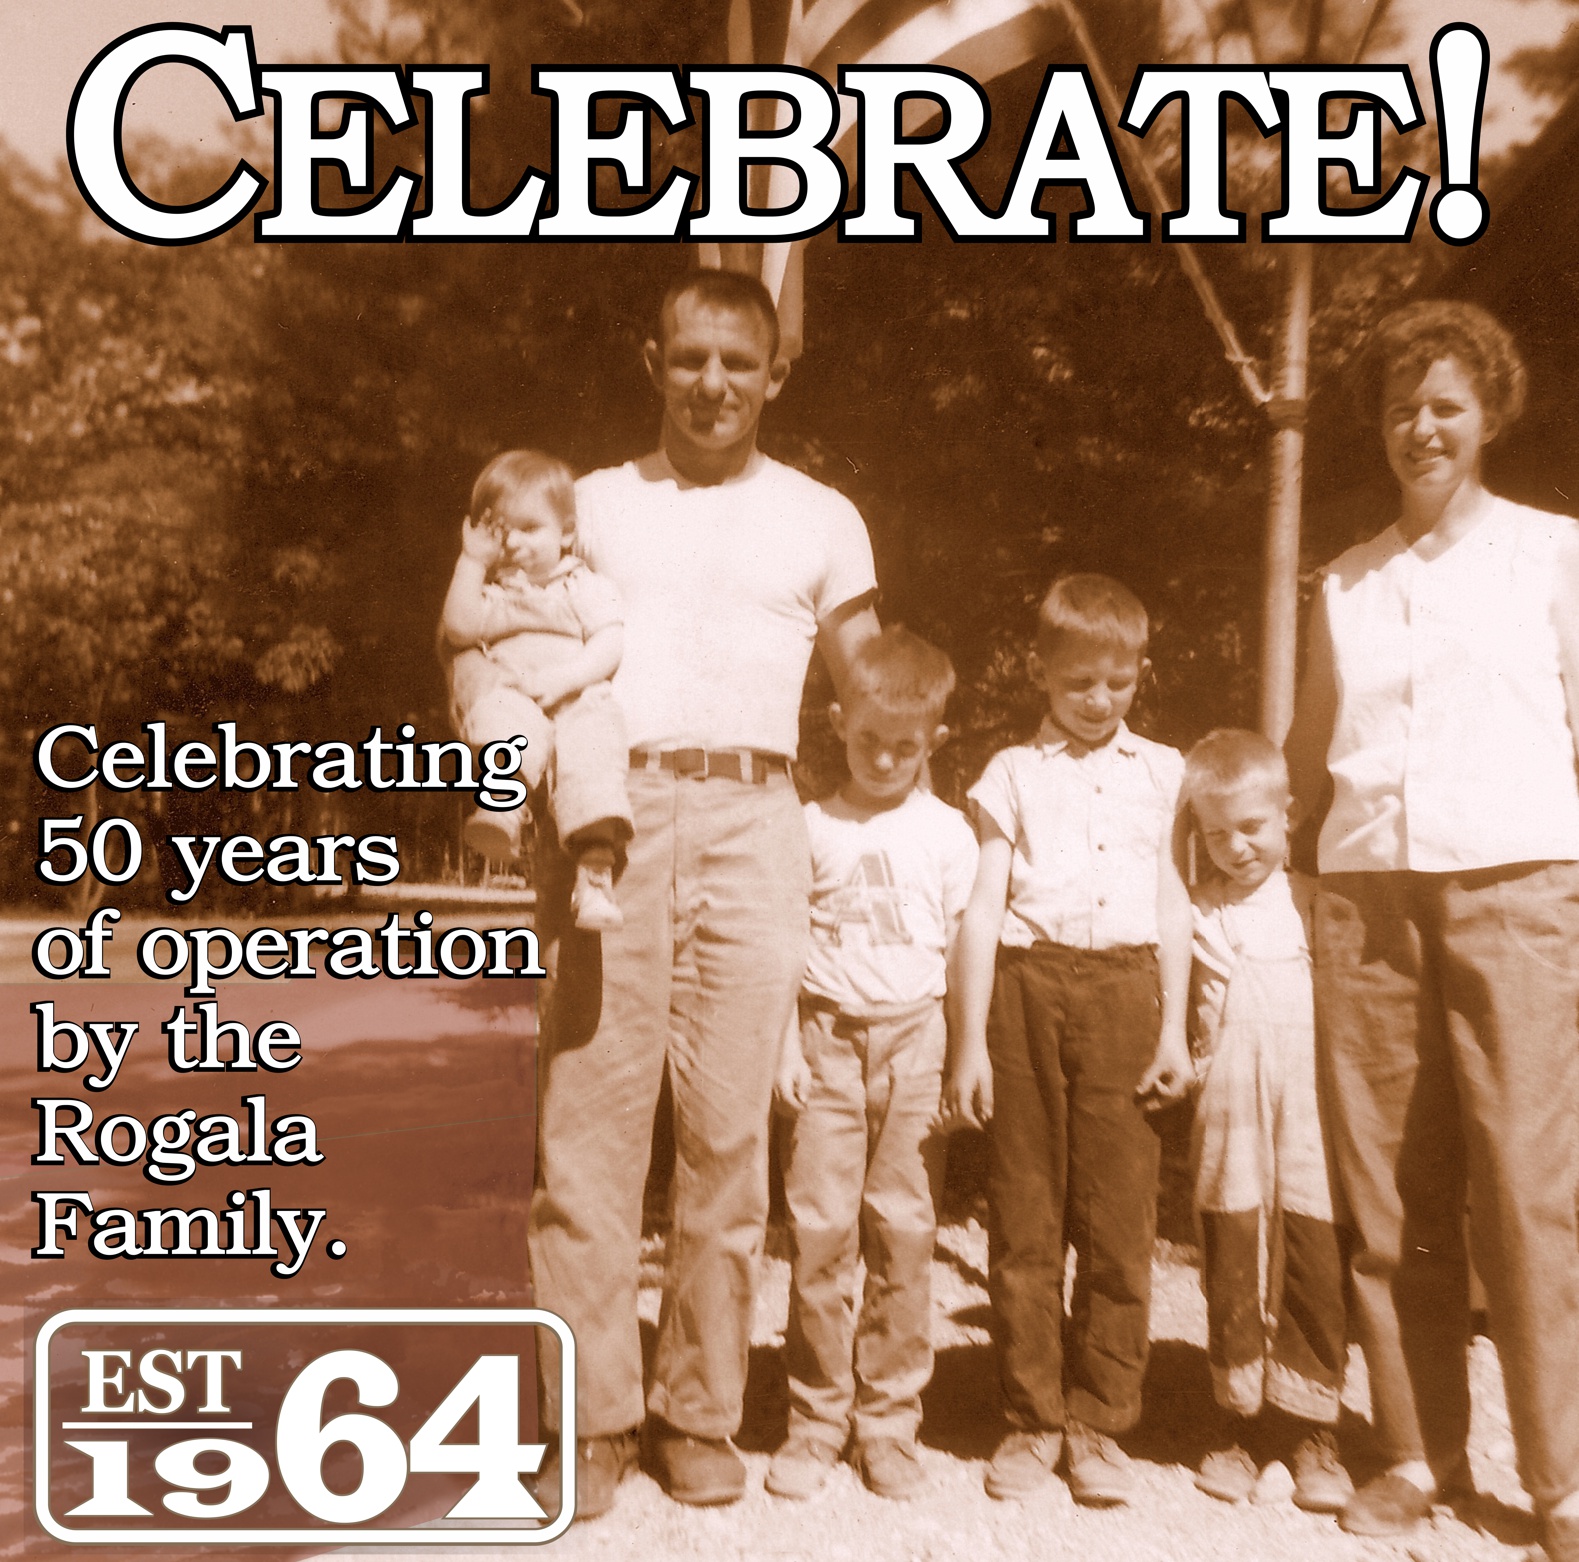 Photo of the Rogala family, circa 1964. Mackinaw Mill Creek Camping celebrates it's 50th Anniversary (1964-2014). Copyright (©) 2014 Mackinaw Mill Creek Camping and Frank Rogala. All rights reserved.